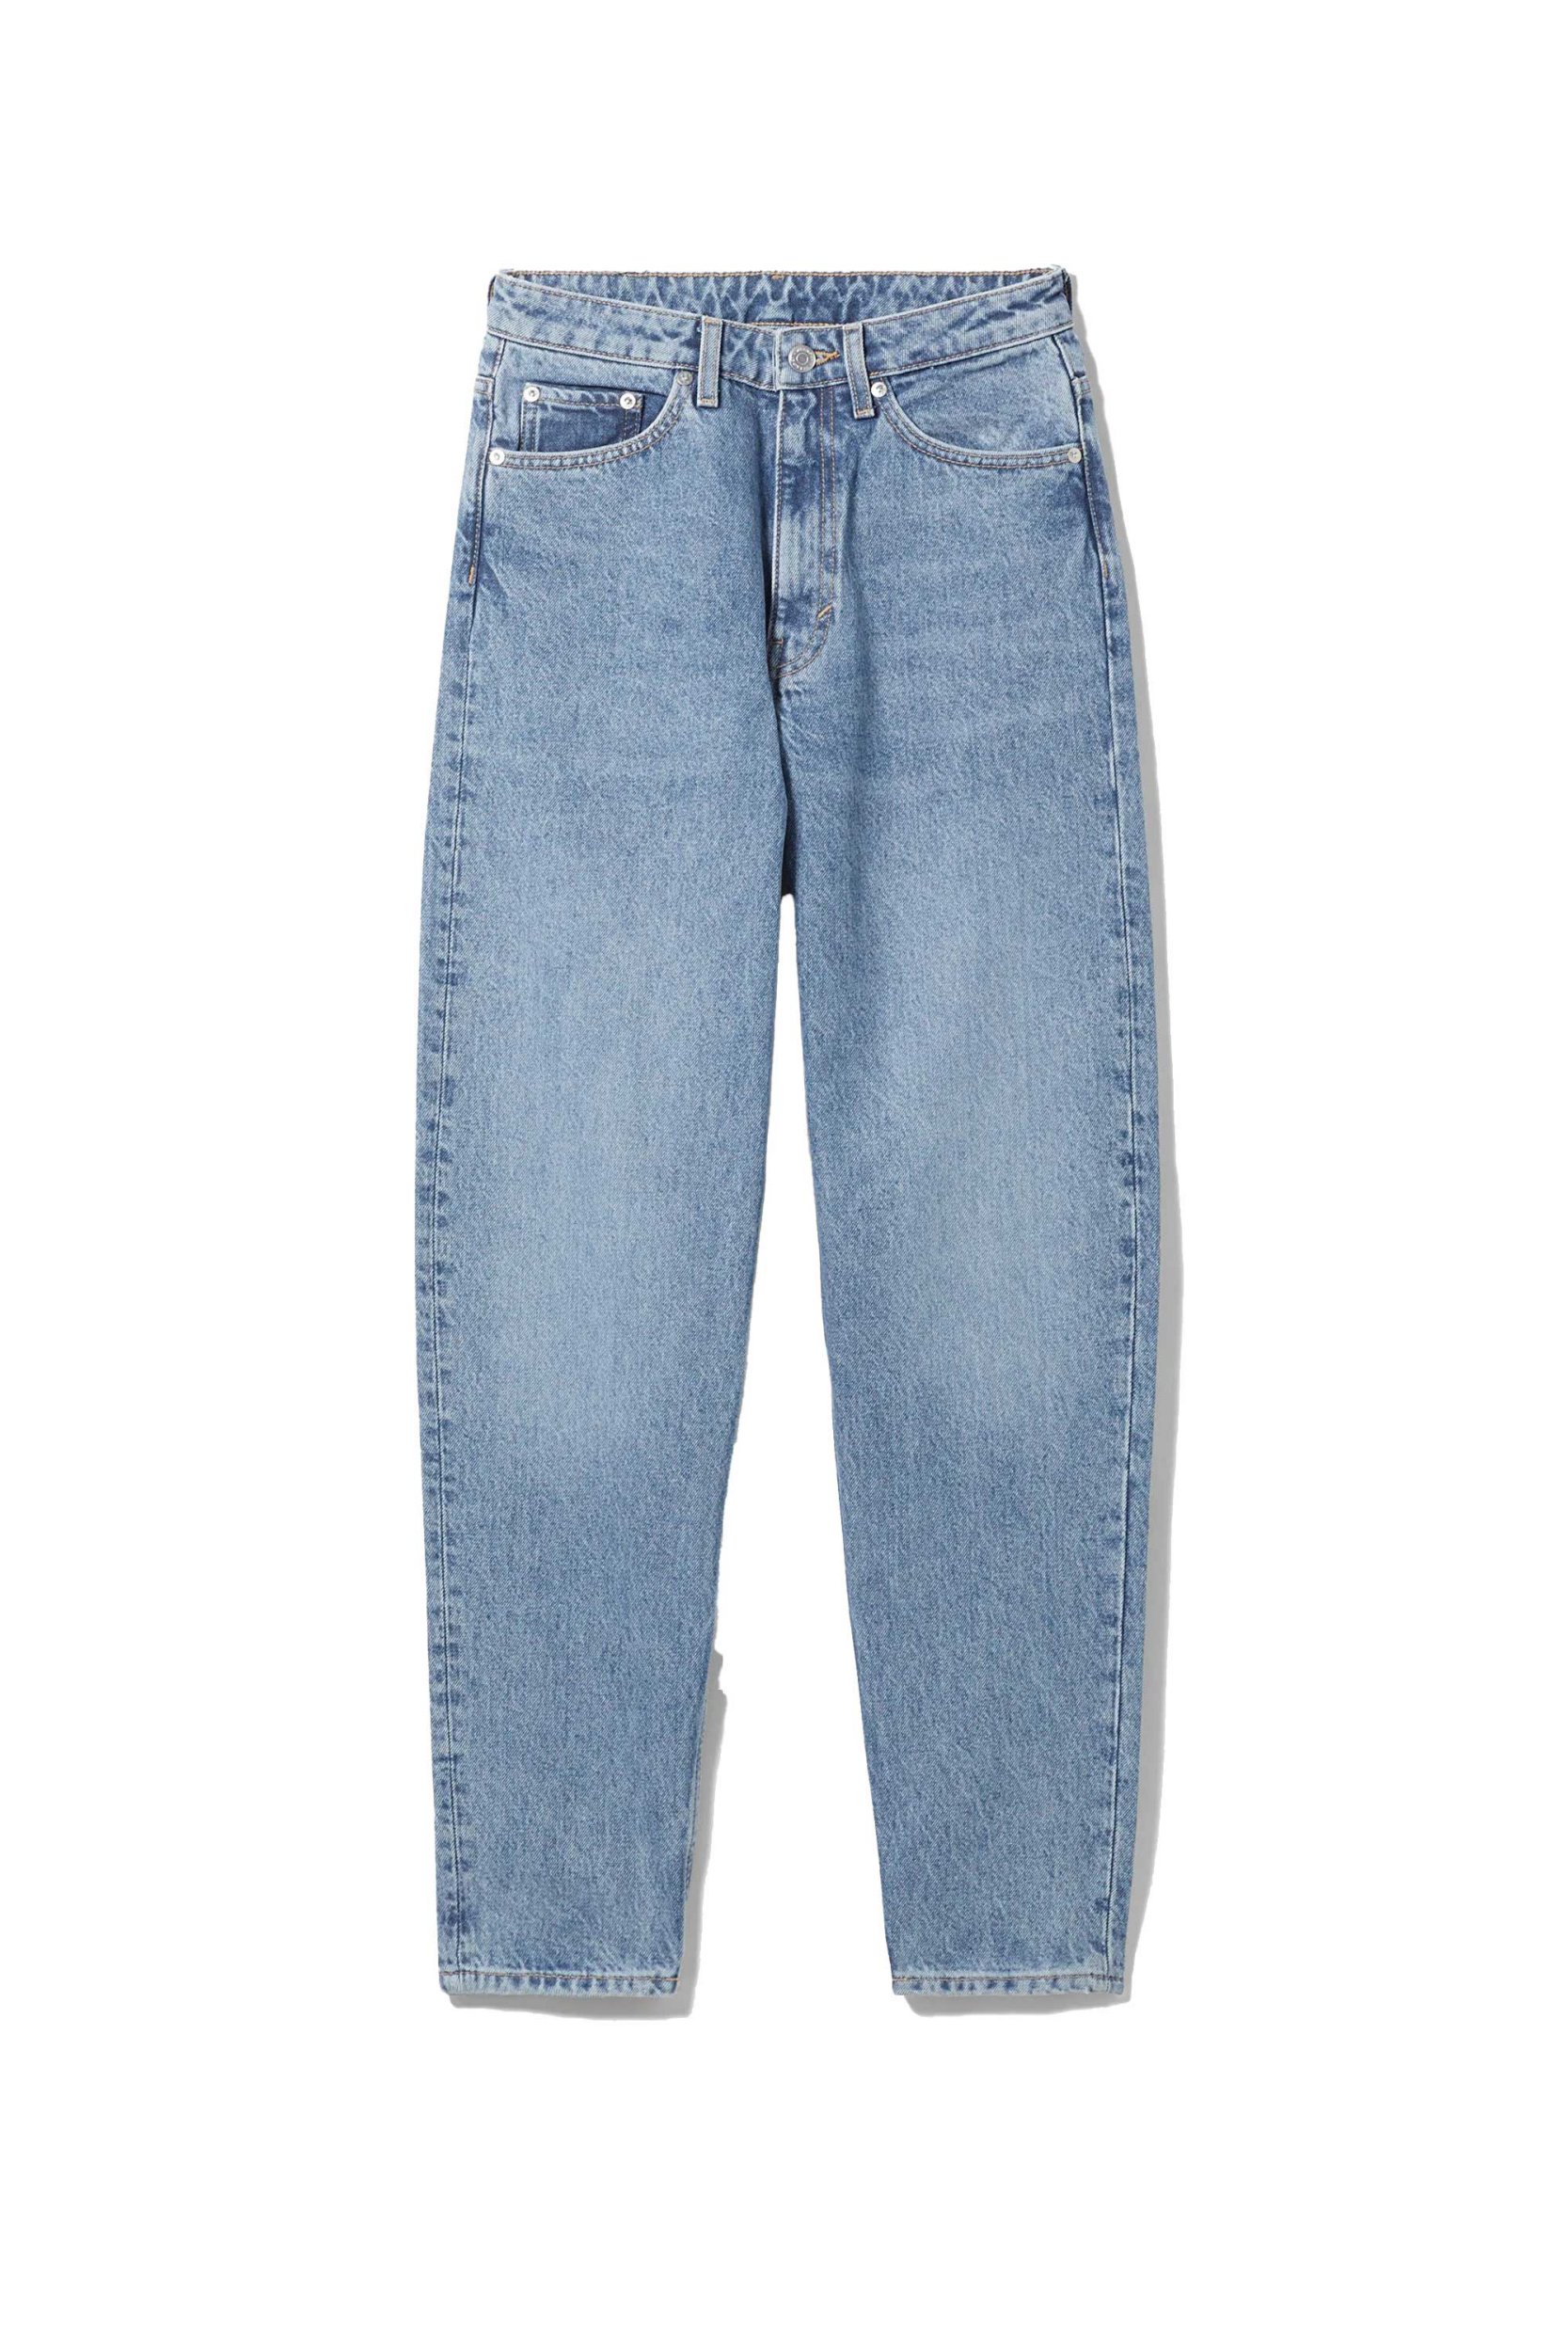 What To Wear With Mom Jeans: Stylish Outfit Ideas To Shop Now